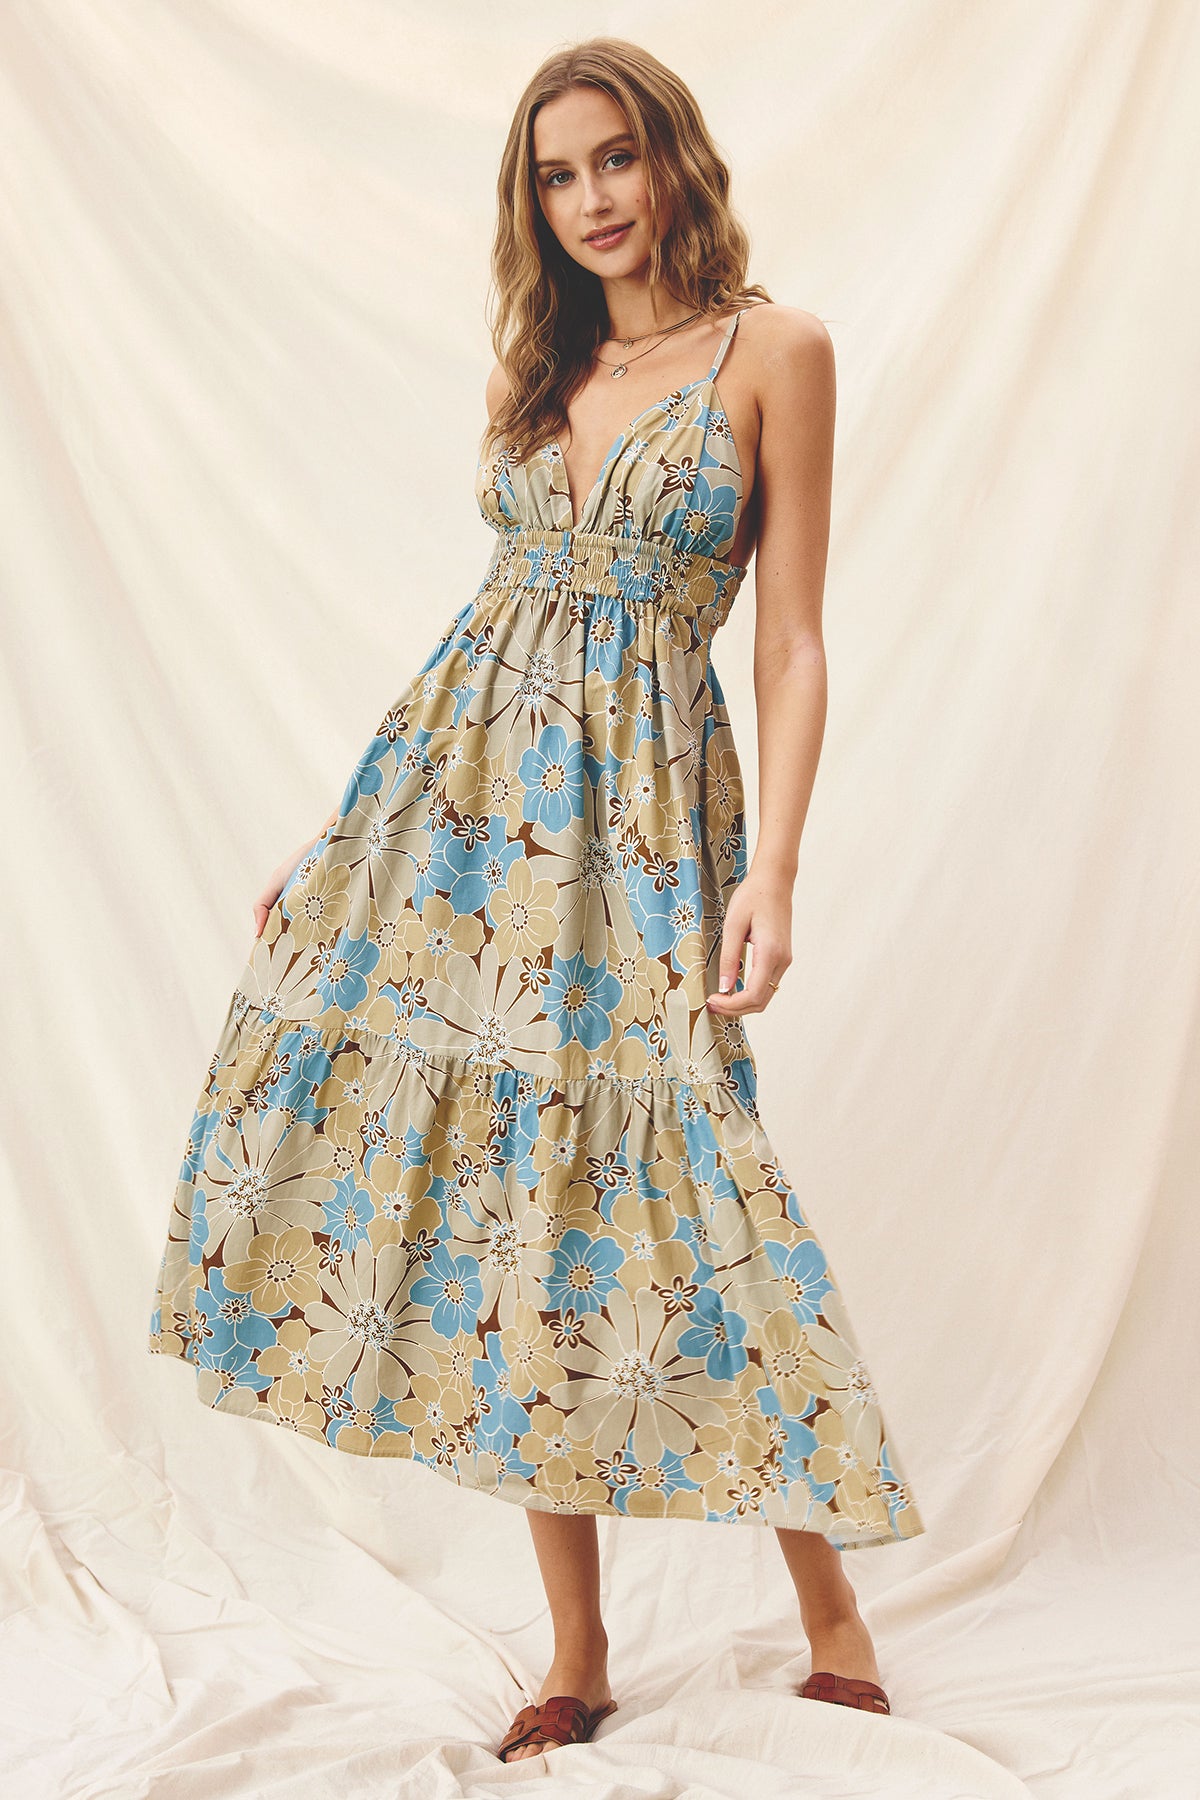 Lily Pad Cutout Detail Maxi Dress - Taupe/Blue Floral